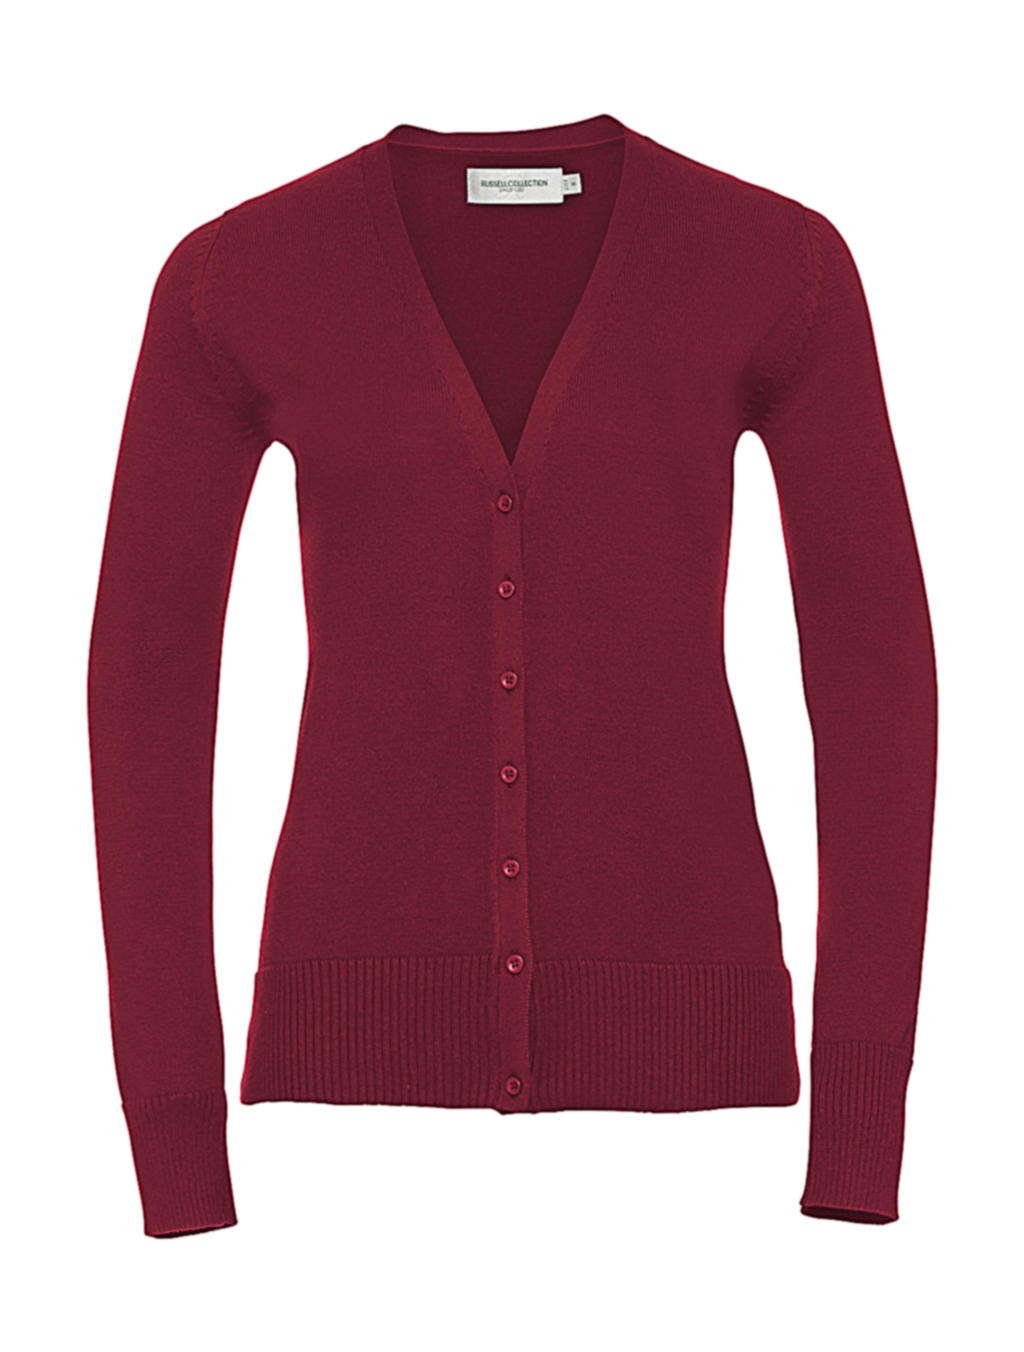  Ladies V-Neck Knitted Cardigan in Farbe Cranberry Marl